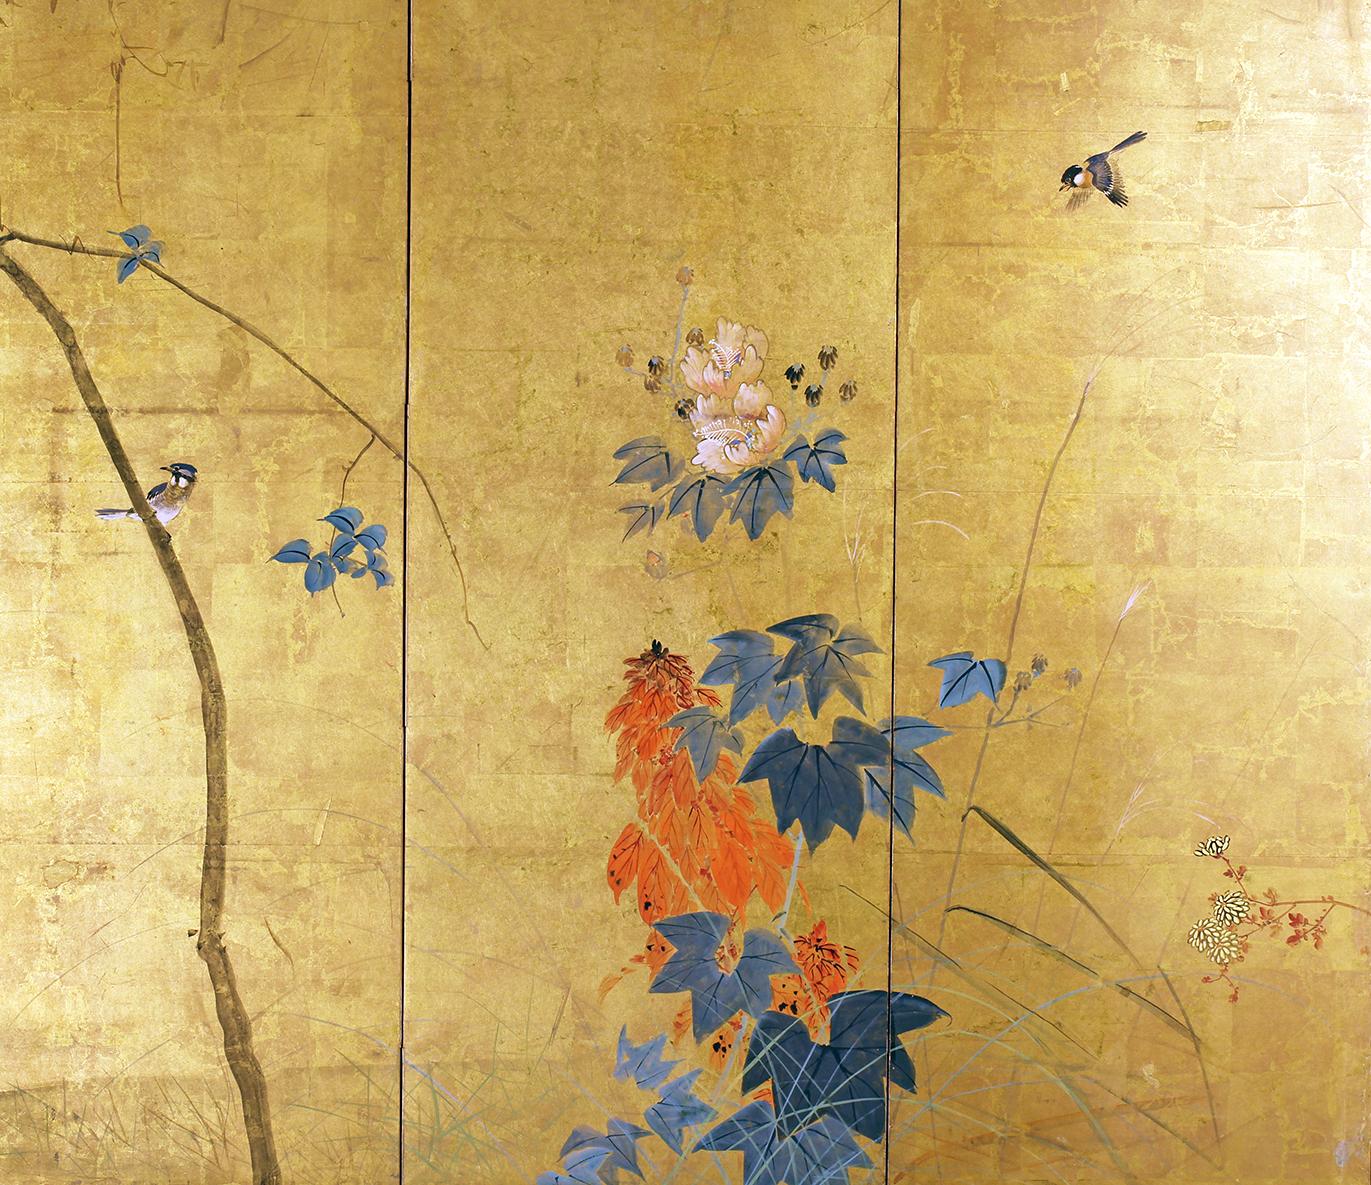 19th century Japanese screen depicting a landscape with ducks, birds and flowers of the Rinpa school, hand painted with mineral pigments on six panels completely covered with gold leaf.
Rinpa is one of the major historical schools of Japanese